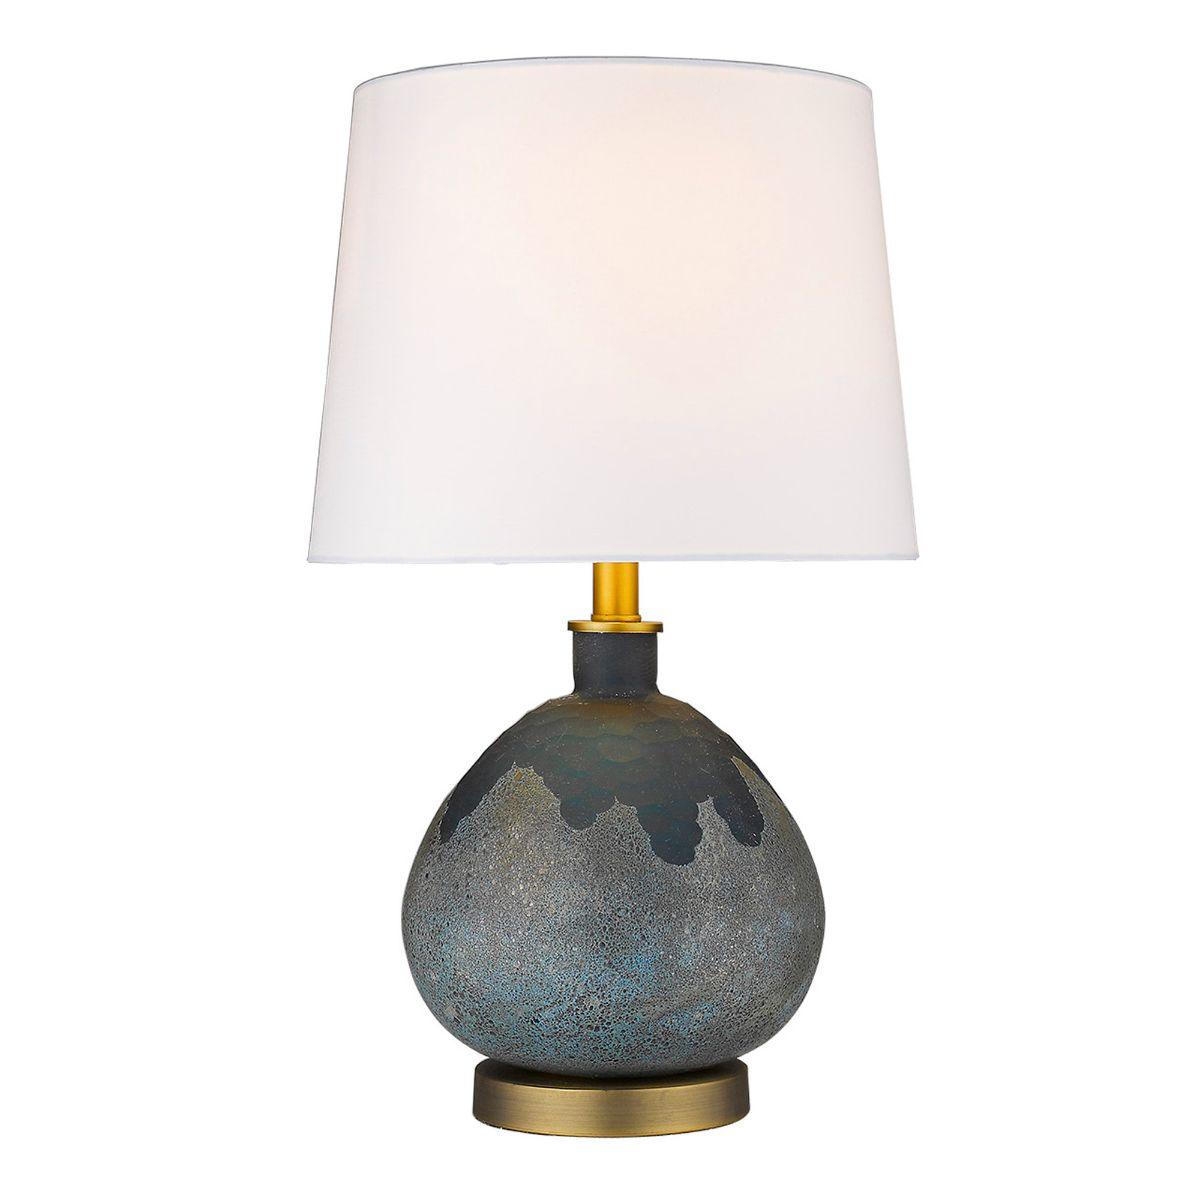 Trend Home 1 Light 22 inches Table Lamp Blue/Brown Glass Body and Brass Accents